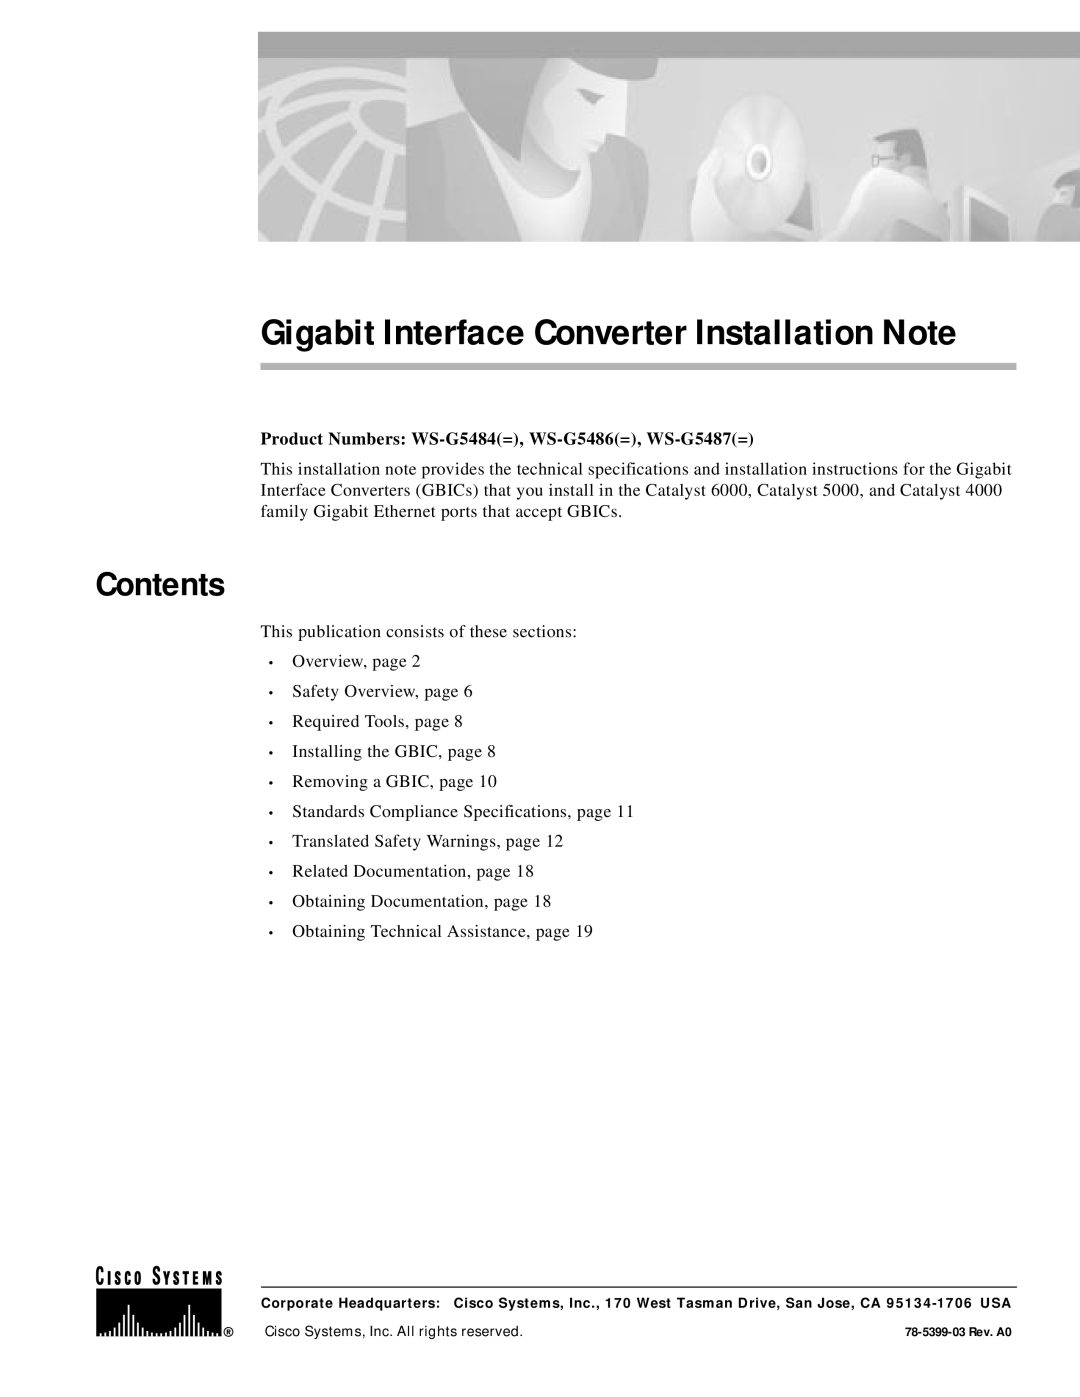 Cisco Systems WS-G5484, WS-G5487, WS-G5486 technical specifications Contents, Gigabit Interface Converter Installation Note 